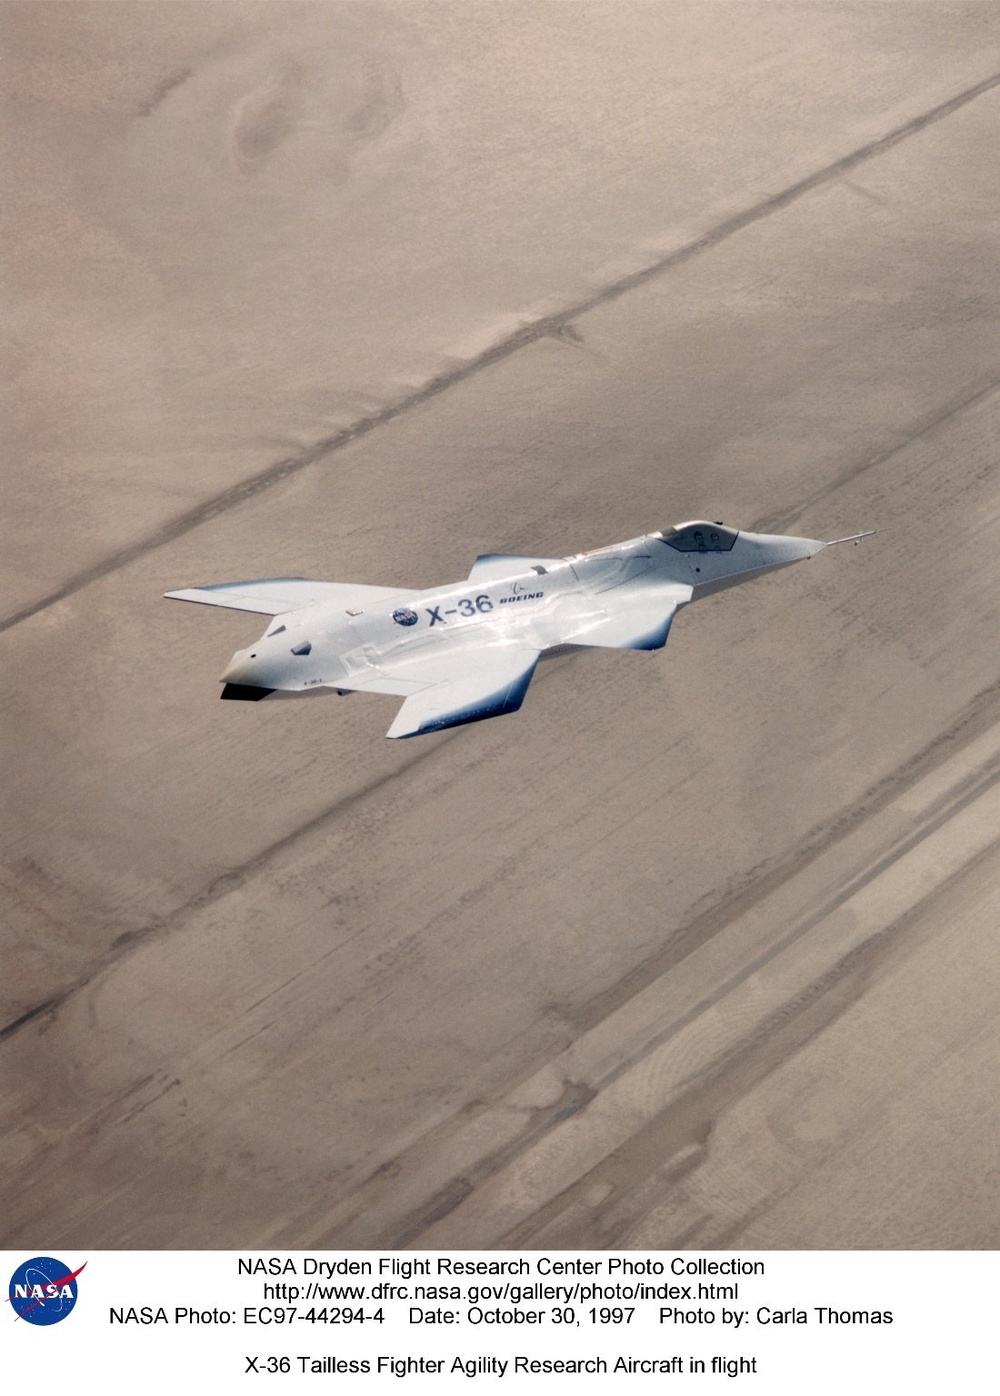 X-36 Tailless Fighter Agility Research Aircraft in flight